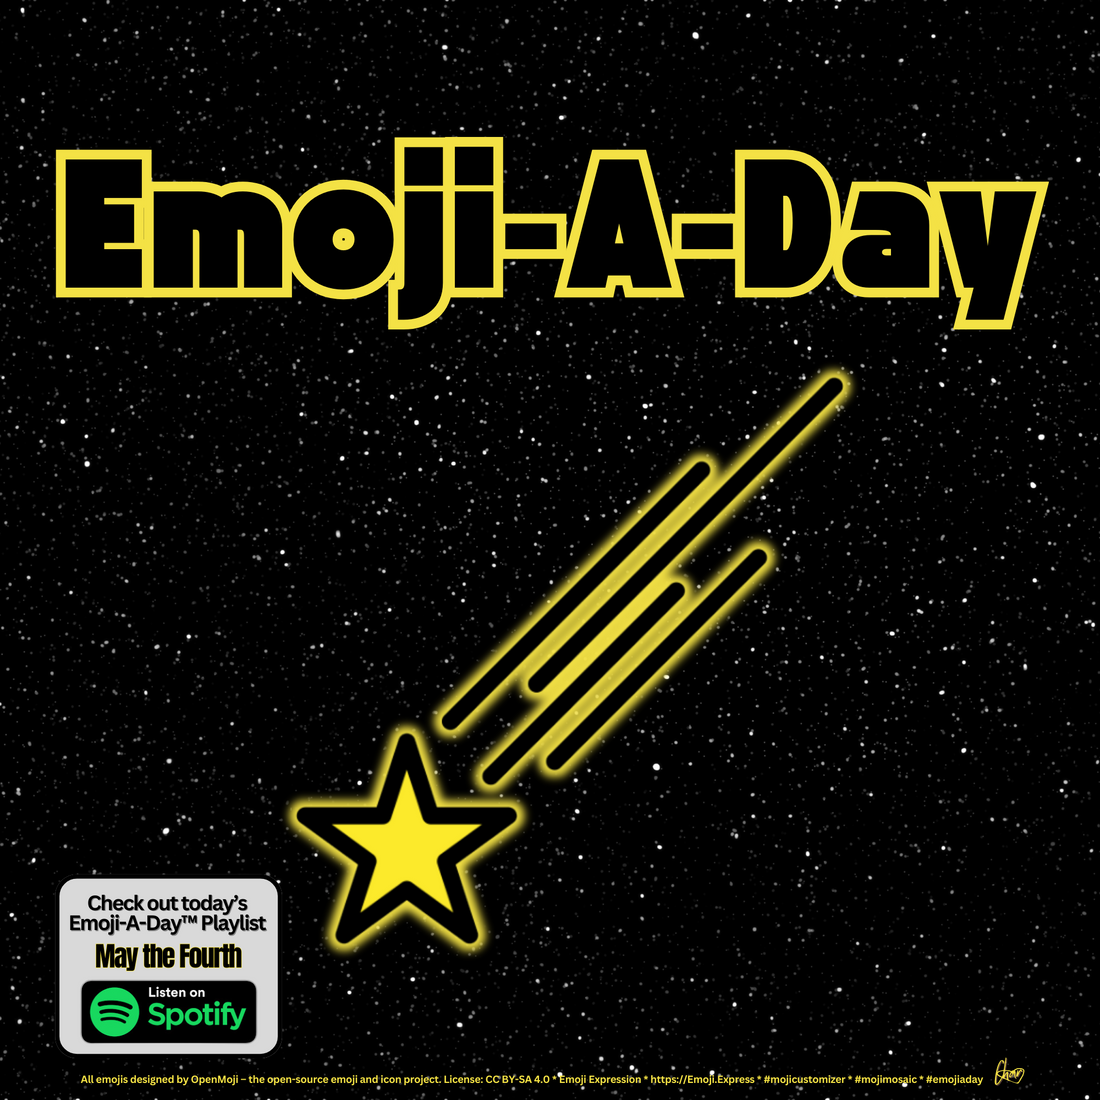 Emoij-A-Day theme with Shooting Star emoji and May the Fourth Spotify Playlist